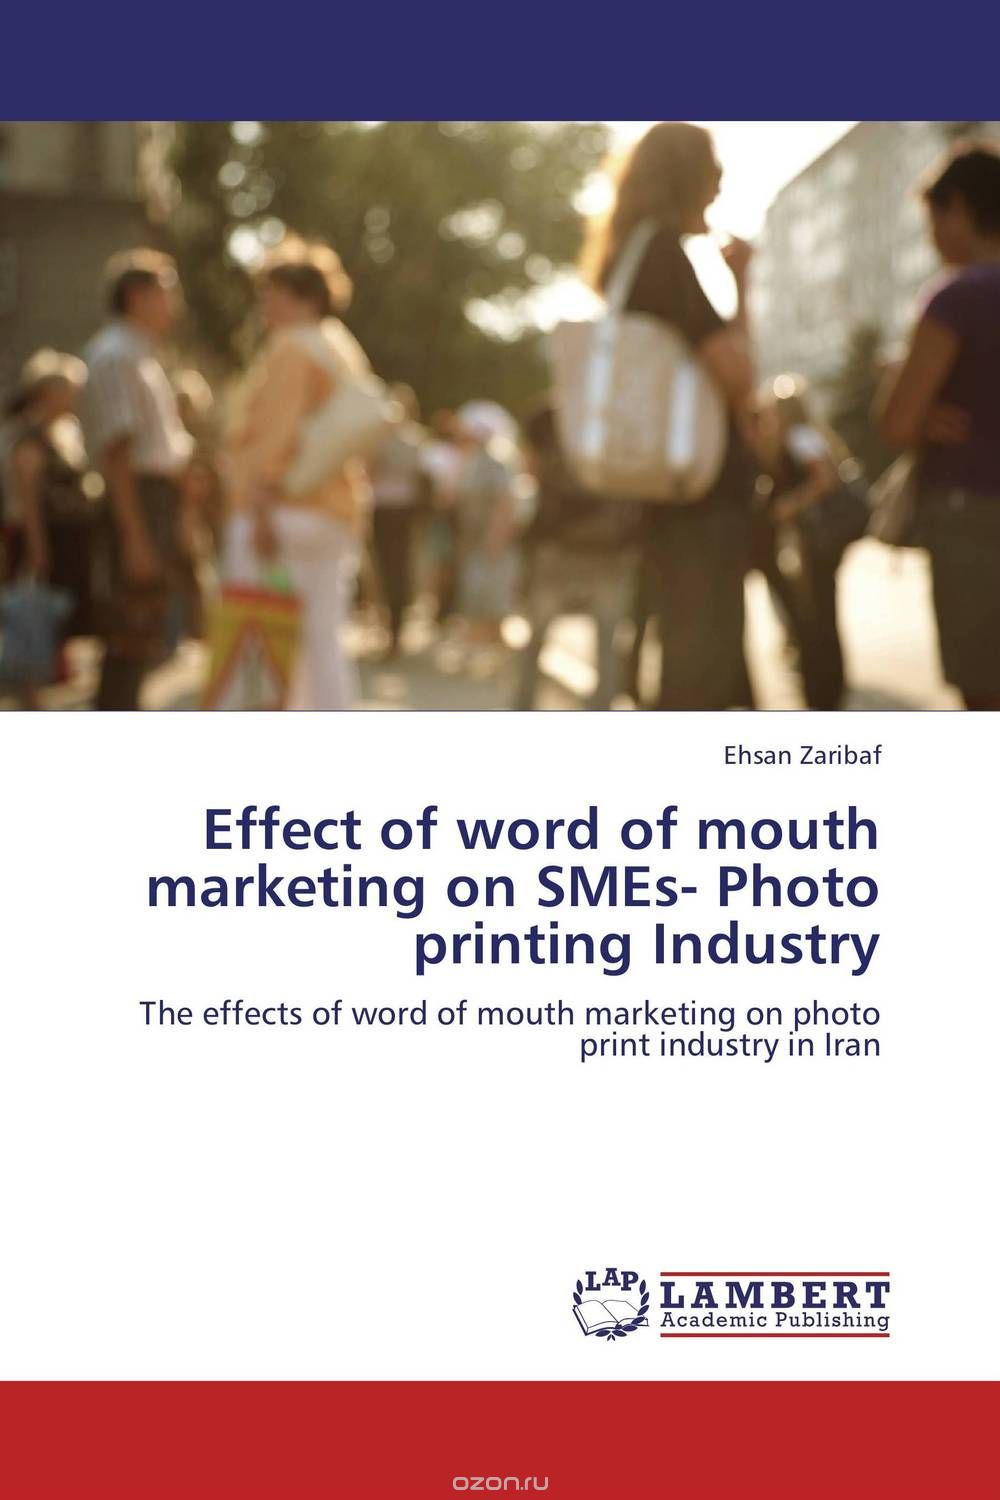 Скачать книгу "Effect of word of mouth marketing on SMEs- Photo printing Industry"